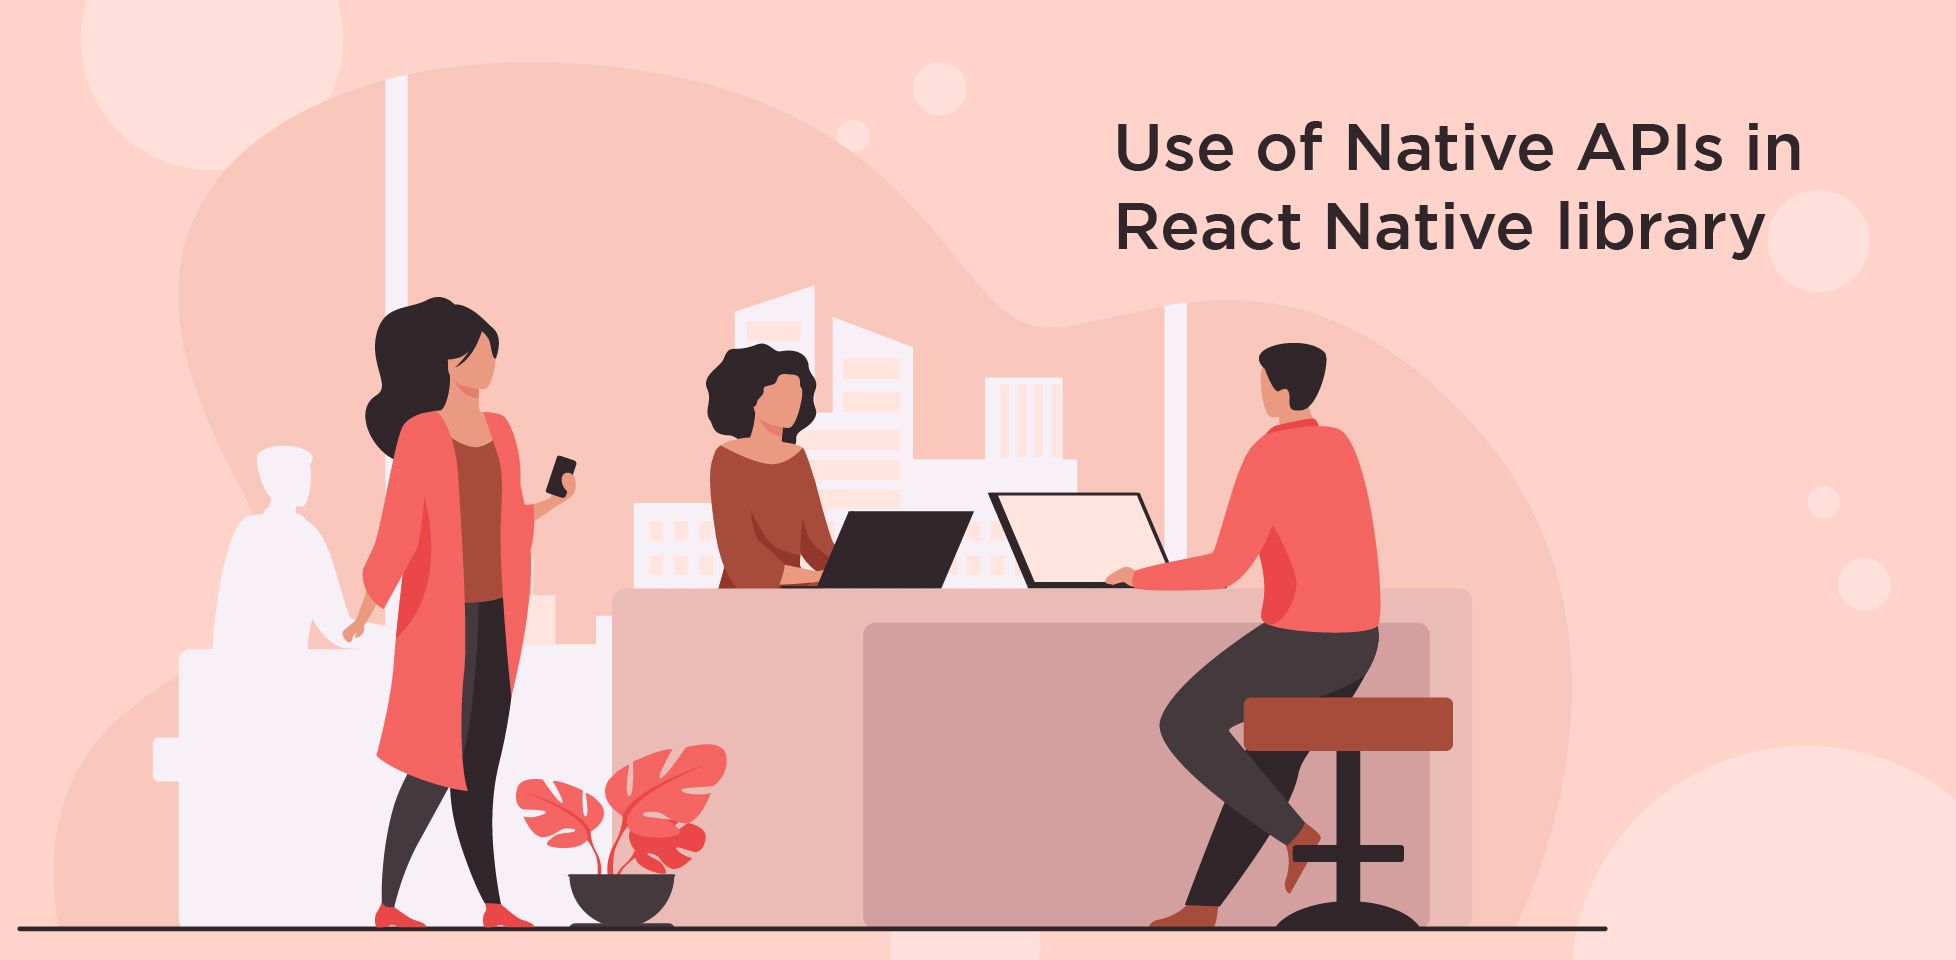 The use of Native APIs in the React Native library